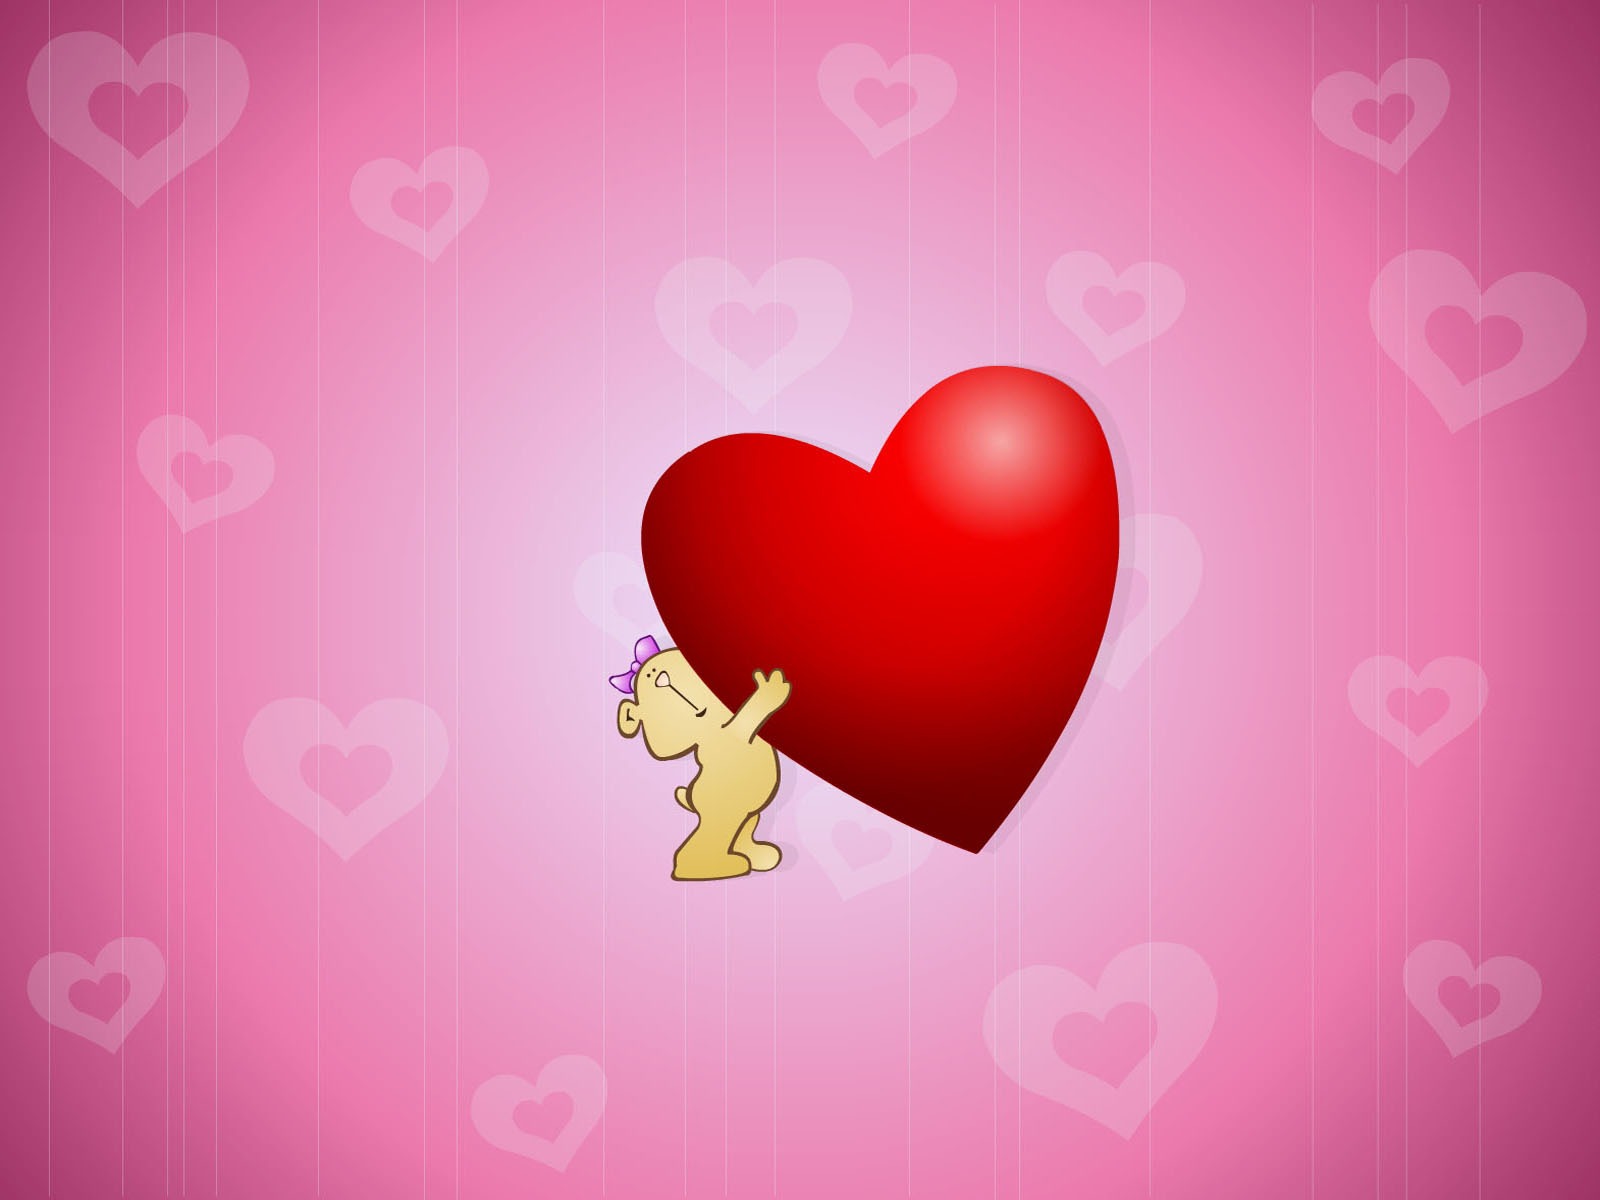 Valentine's Day Theme Wallpapers (3) #8 - 1600x1200